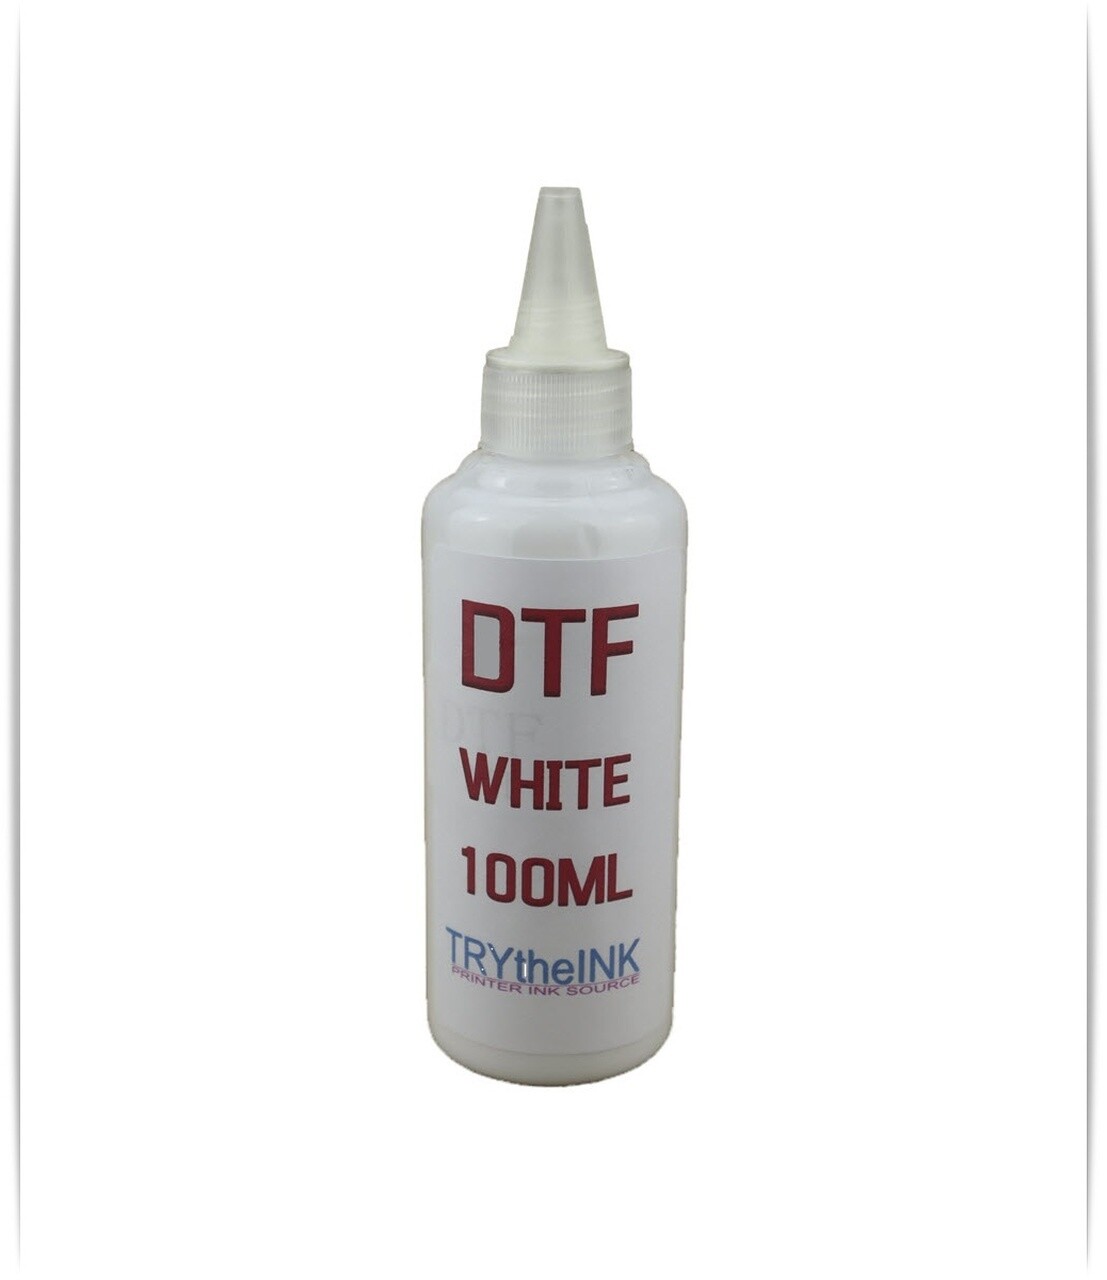 White DTF Ink Direct To Film 100ml Bottle for Epson, Epson Print Head printers